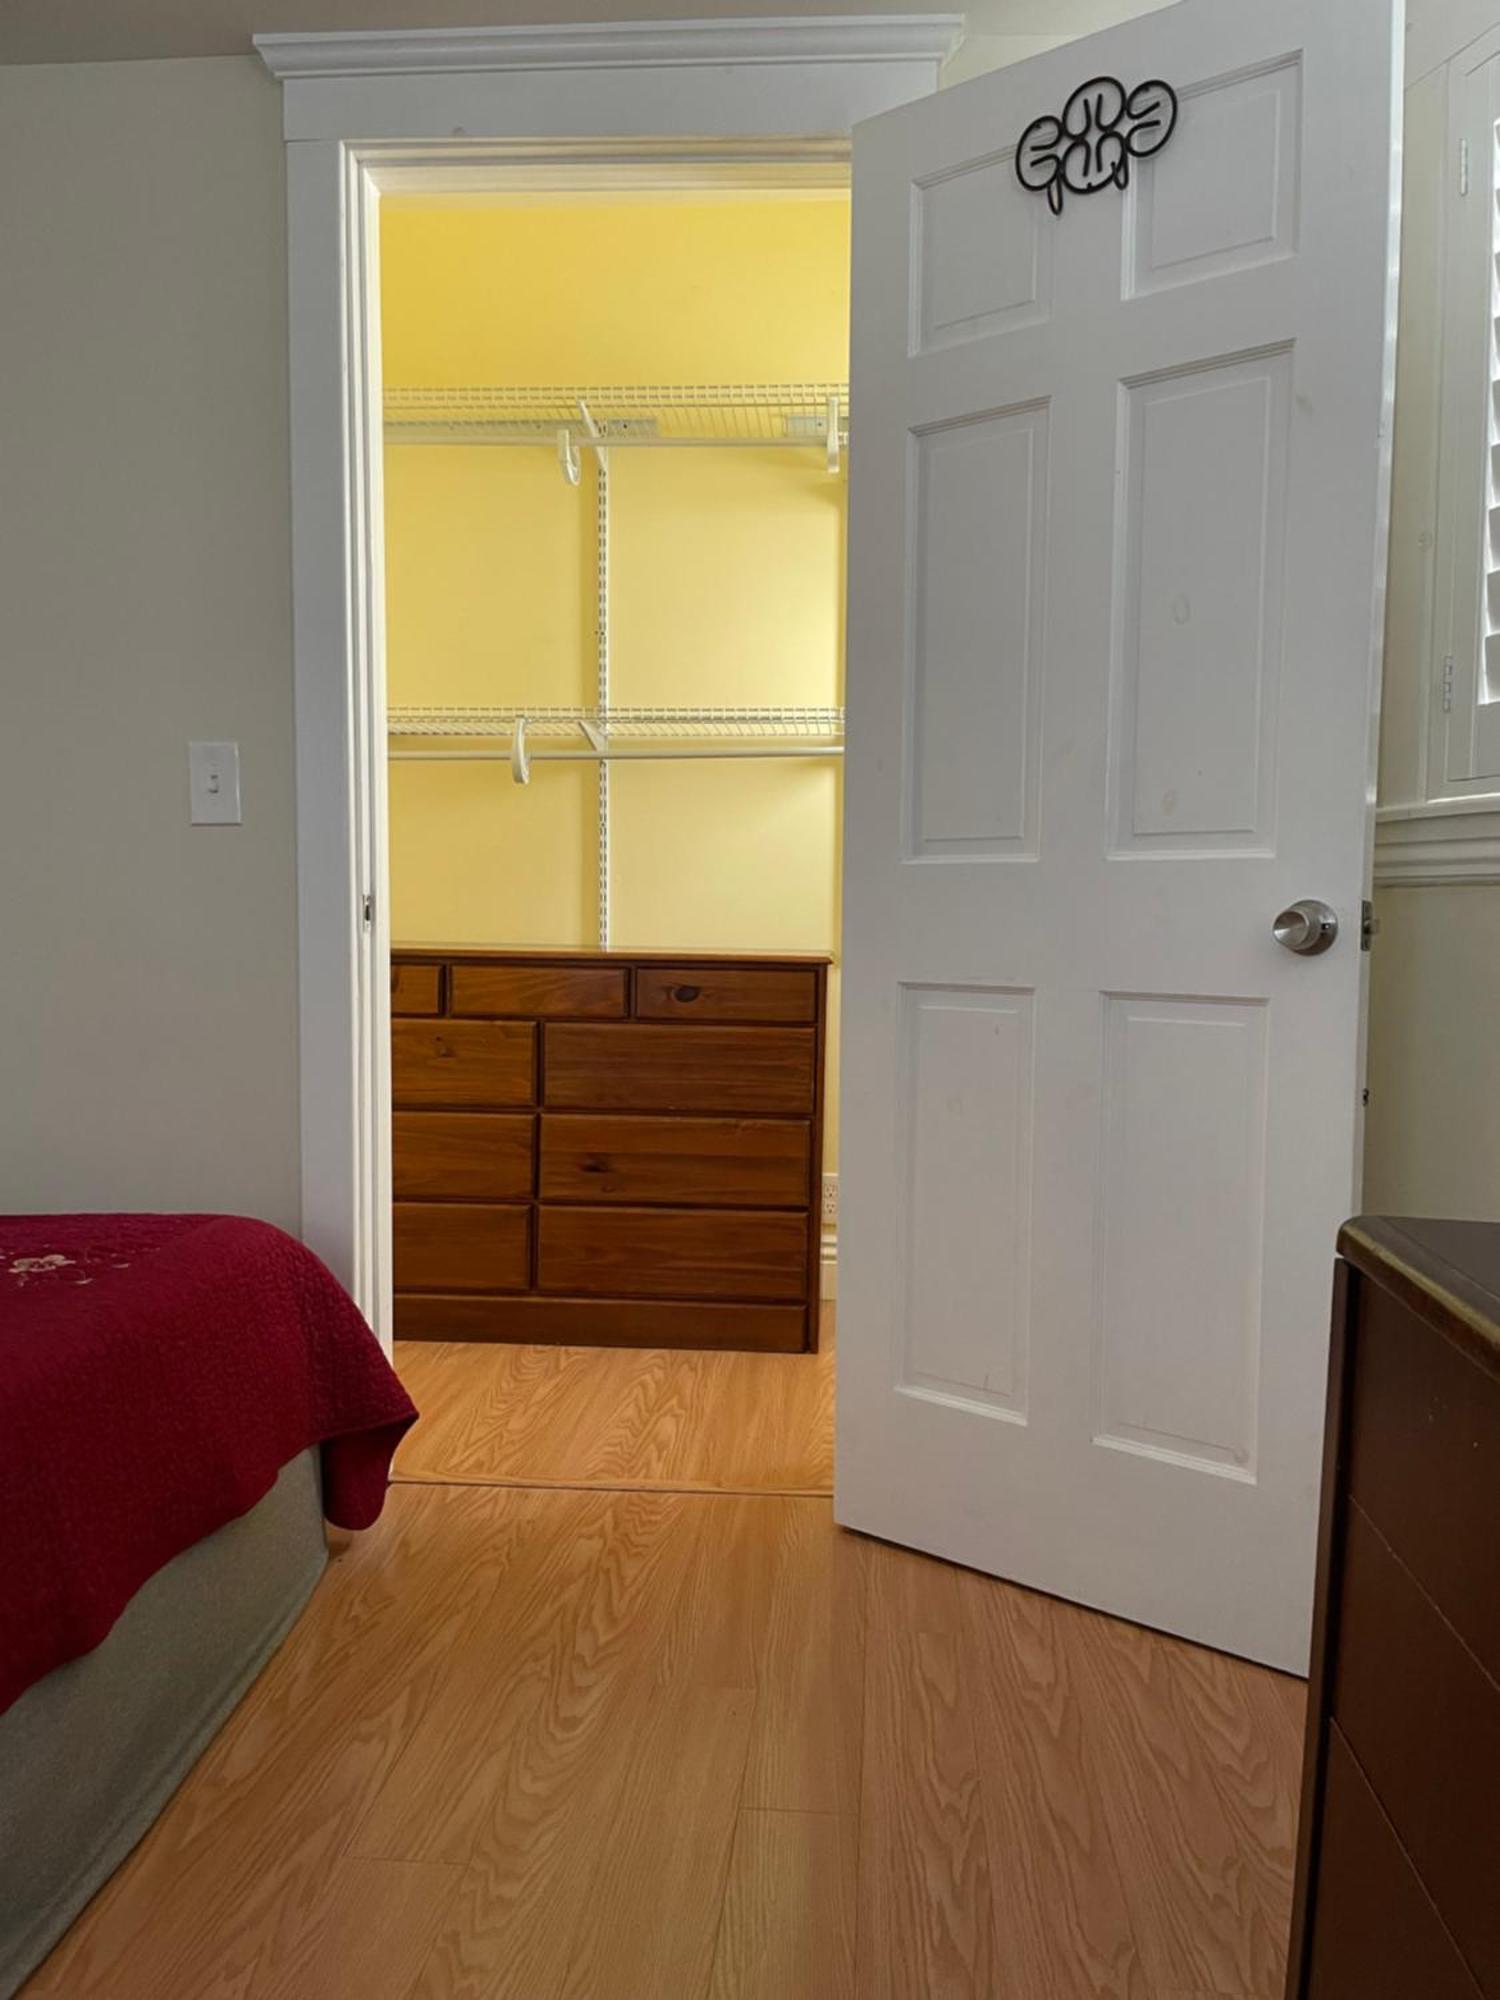 Spacious Private Los Angeles Bedroom With Ac & Wifi & Private Fridge Near Usc The Coliseum Exposition Park Bmo Stadium University Of Southern California Εξωτερικό φωτογραφία